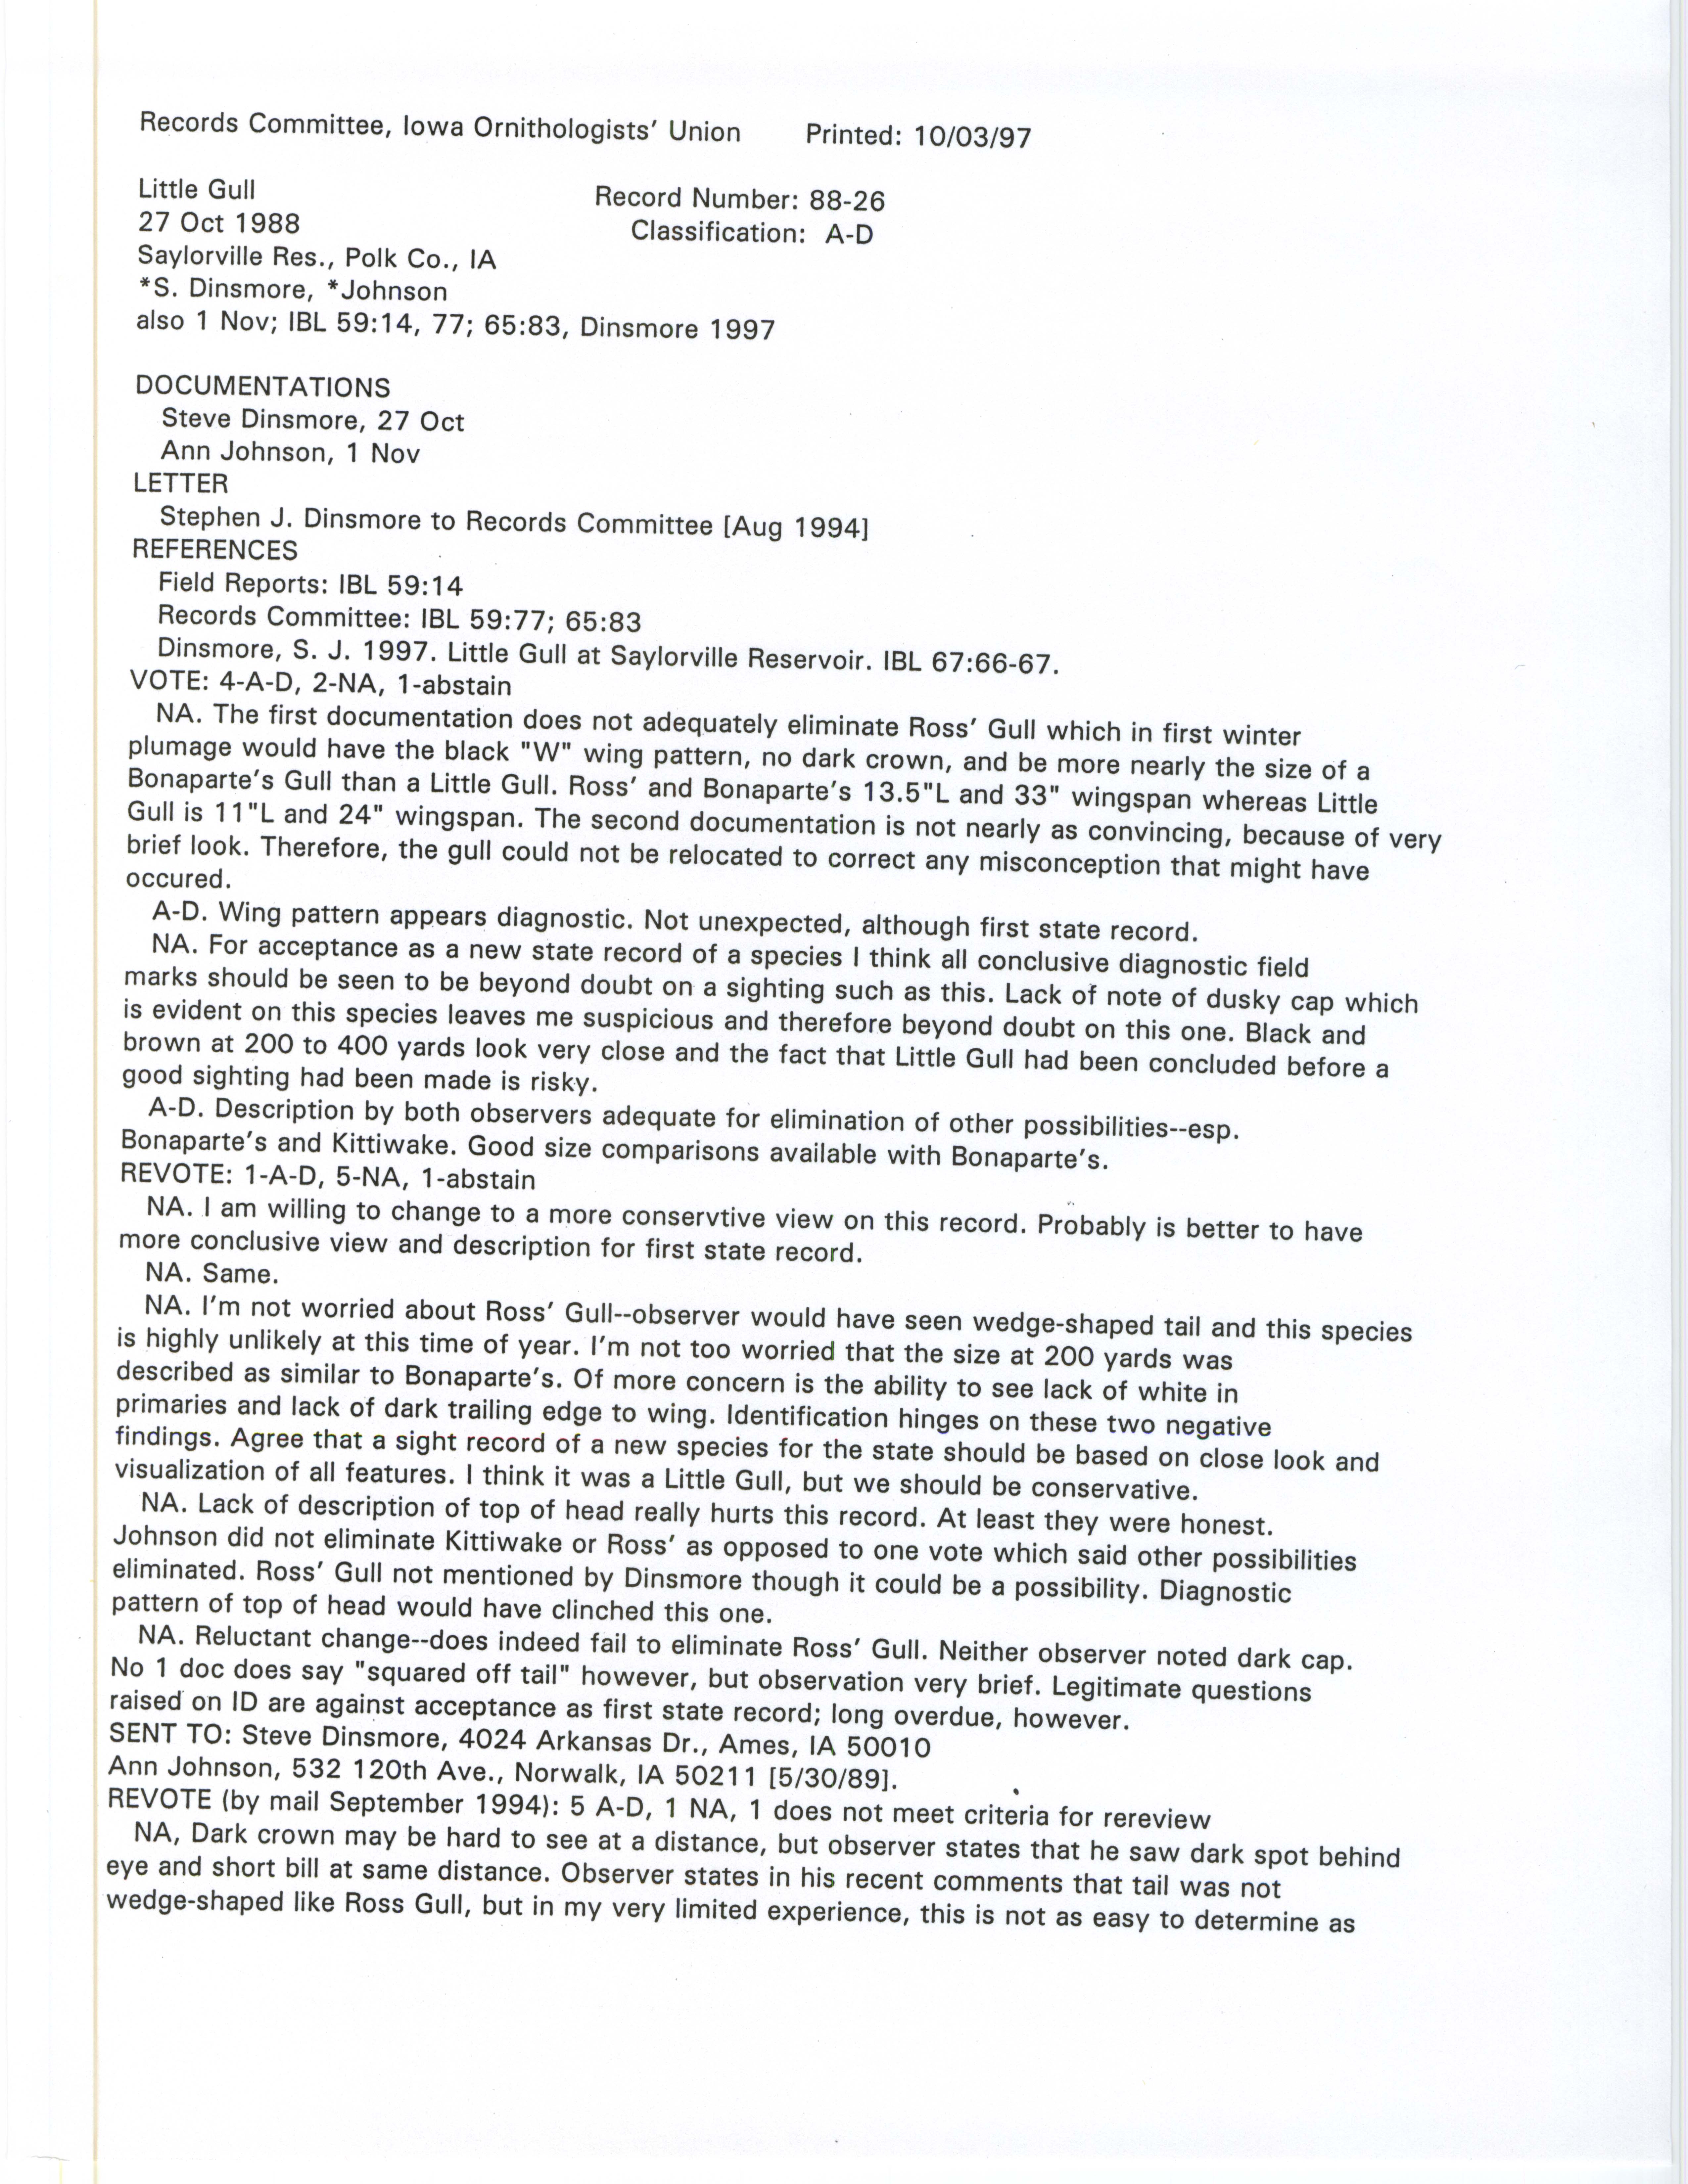 Records Committee review for rare bird sighting of Little Gull near Jester Park in Saylorville Reservoir, 1988